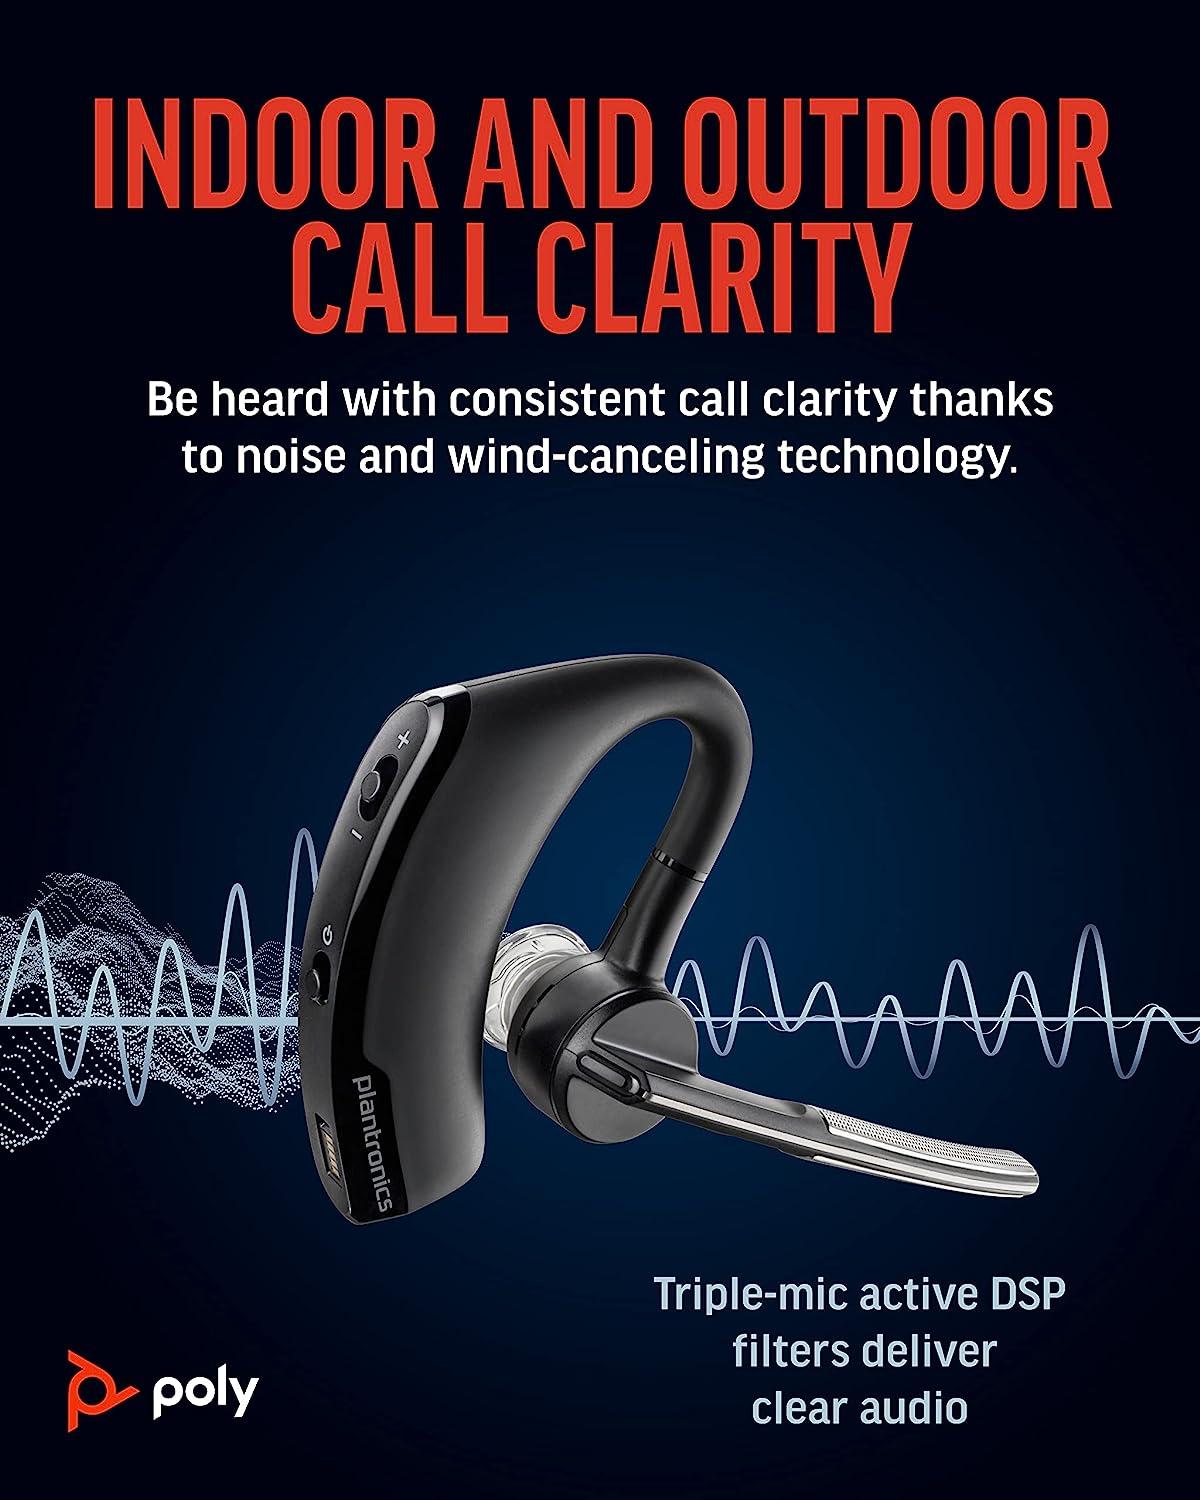 & Poly Volume Single-Ear Design - Headset Legend Mobile/Tablet Mic w/Noise-Canceling (Plantronics) -FFP - Voice Wireless - Ergonomic - Bluetooth Mute Buttons Controls to Bluetooth -Connect Voyager via